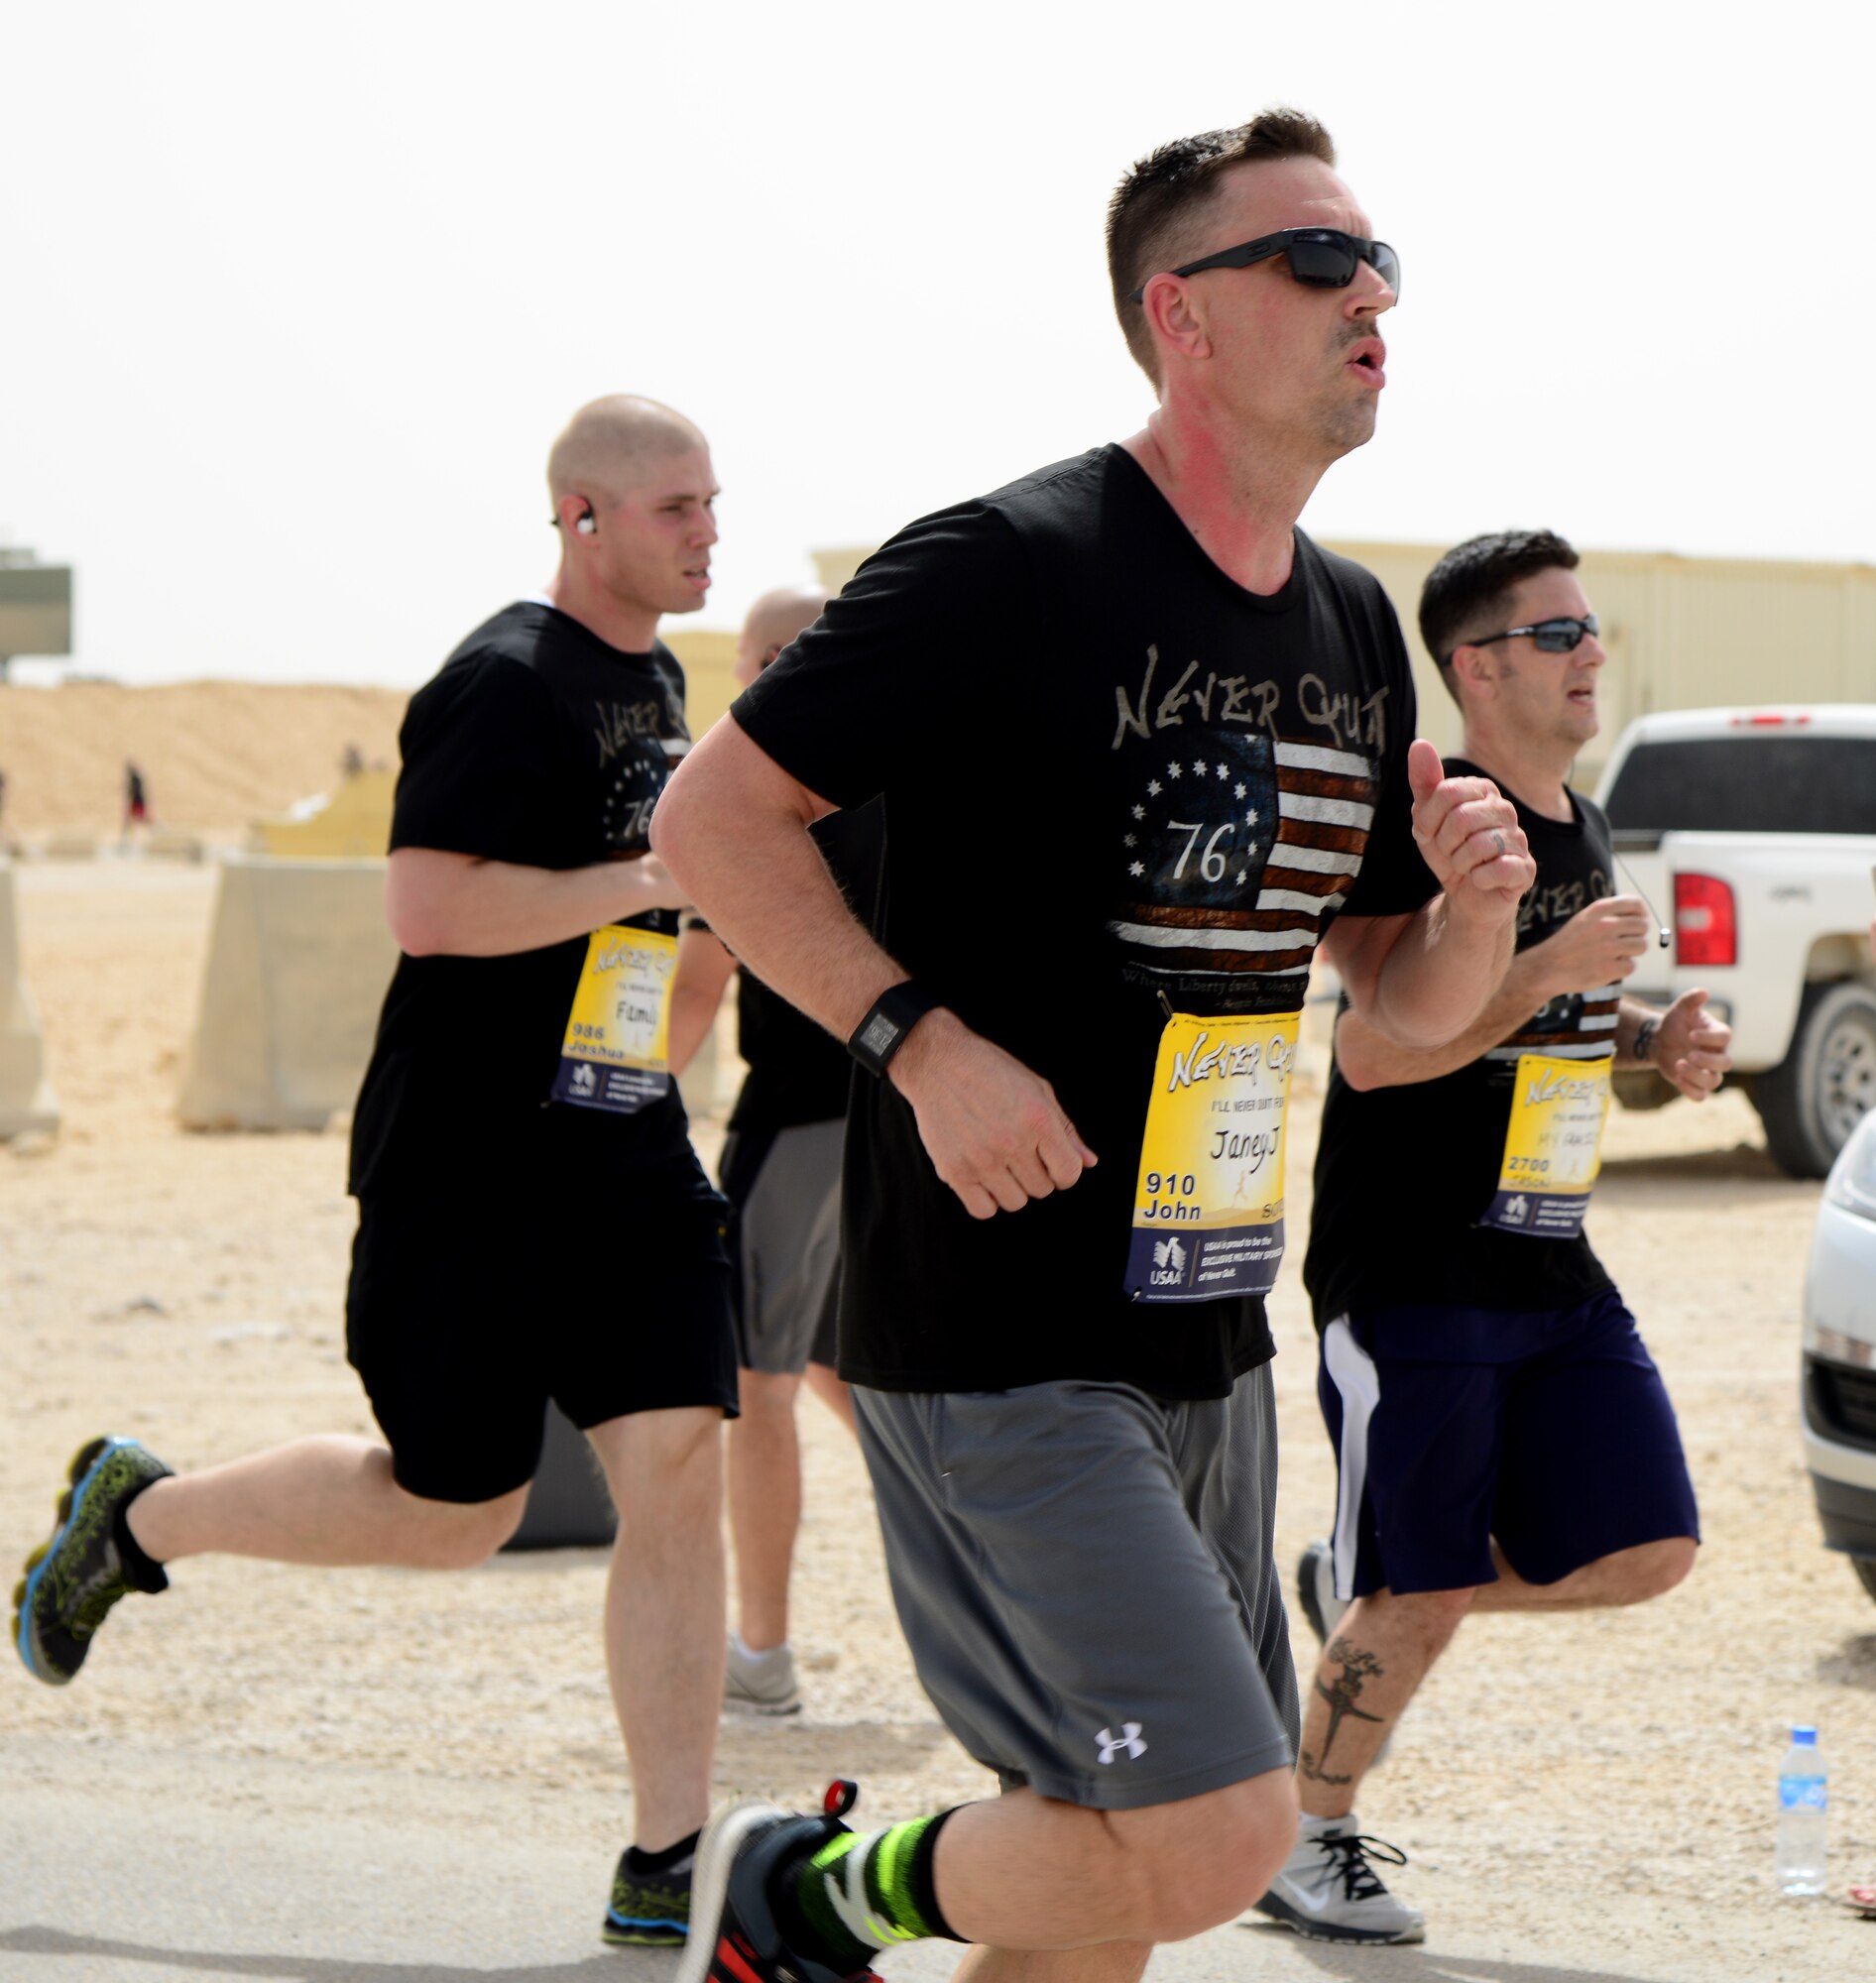 U.S. Air Force Master Sgt. John Reagan, 379th Air Expeditionary Wing safety office, participates in the 379th AEW’s Never Quit event 5k run, April 4, 2015, at Al Udeid Air Base, Qatar. The event was coordinated by the 379th Expeditionary Force Support Squadron with informational booths provided by the 379th Expeditionary Medical Group, 379th Expeditionary Civil Engineer Squadron, and 379th AEW chapel services team. The purpose of the event was to encourage healthy and positive life choices. (U.S. Air Force photo by Senior Airman Kia Atkins)